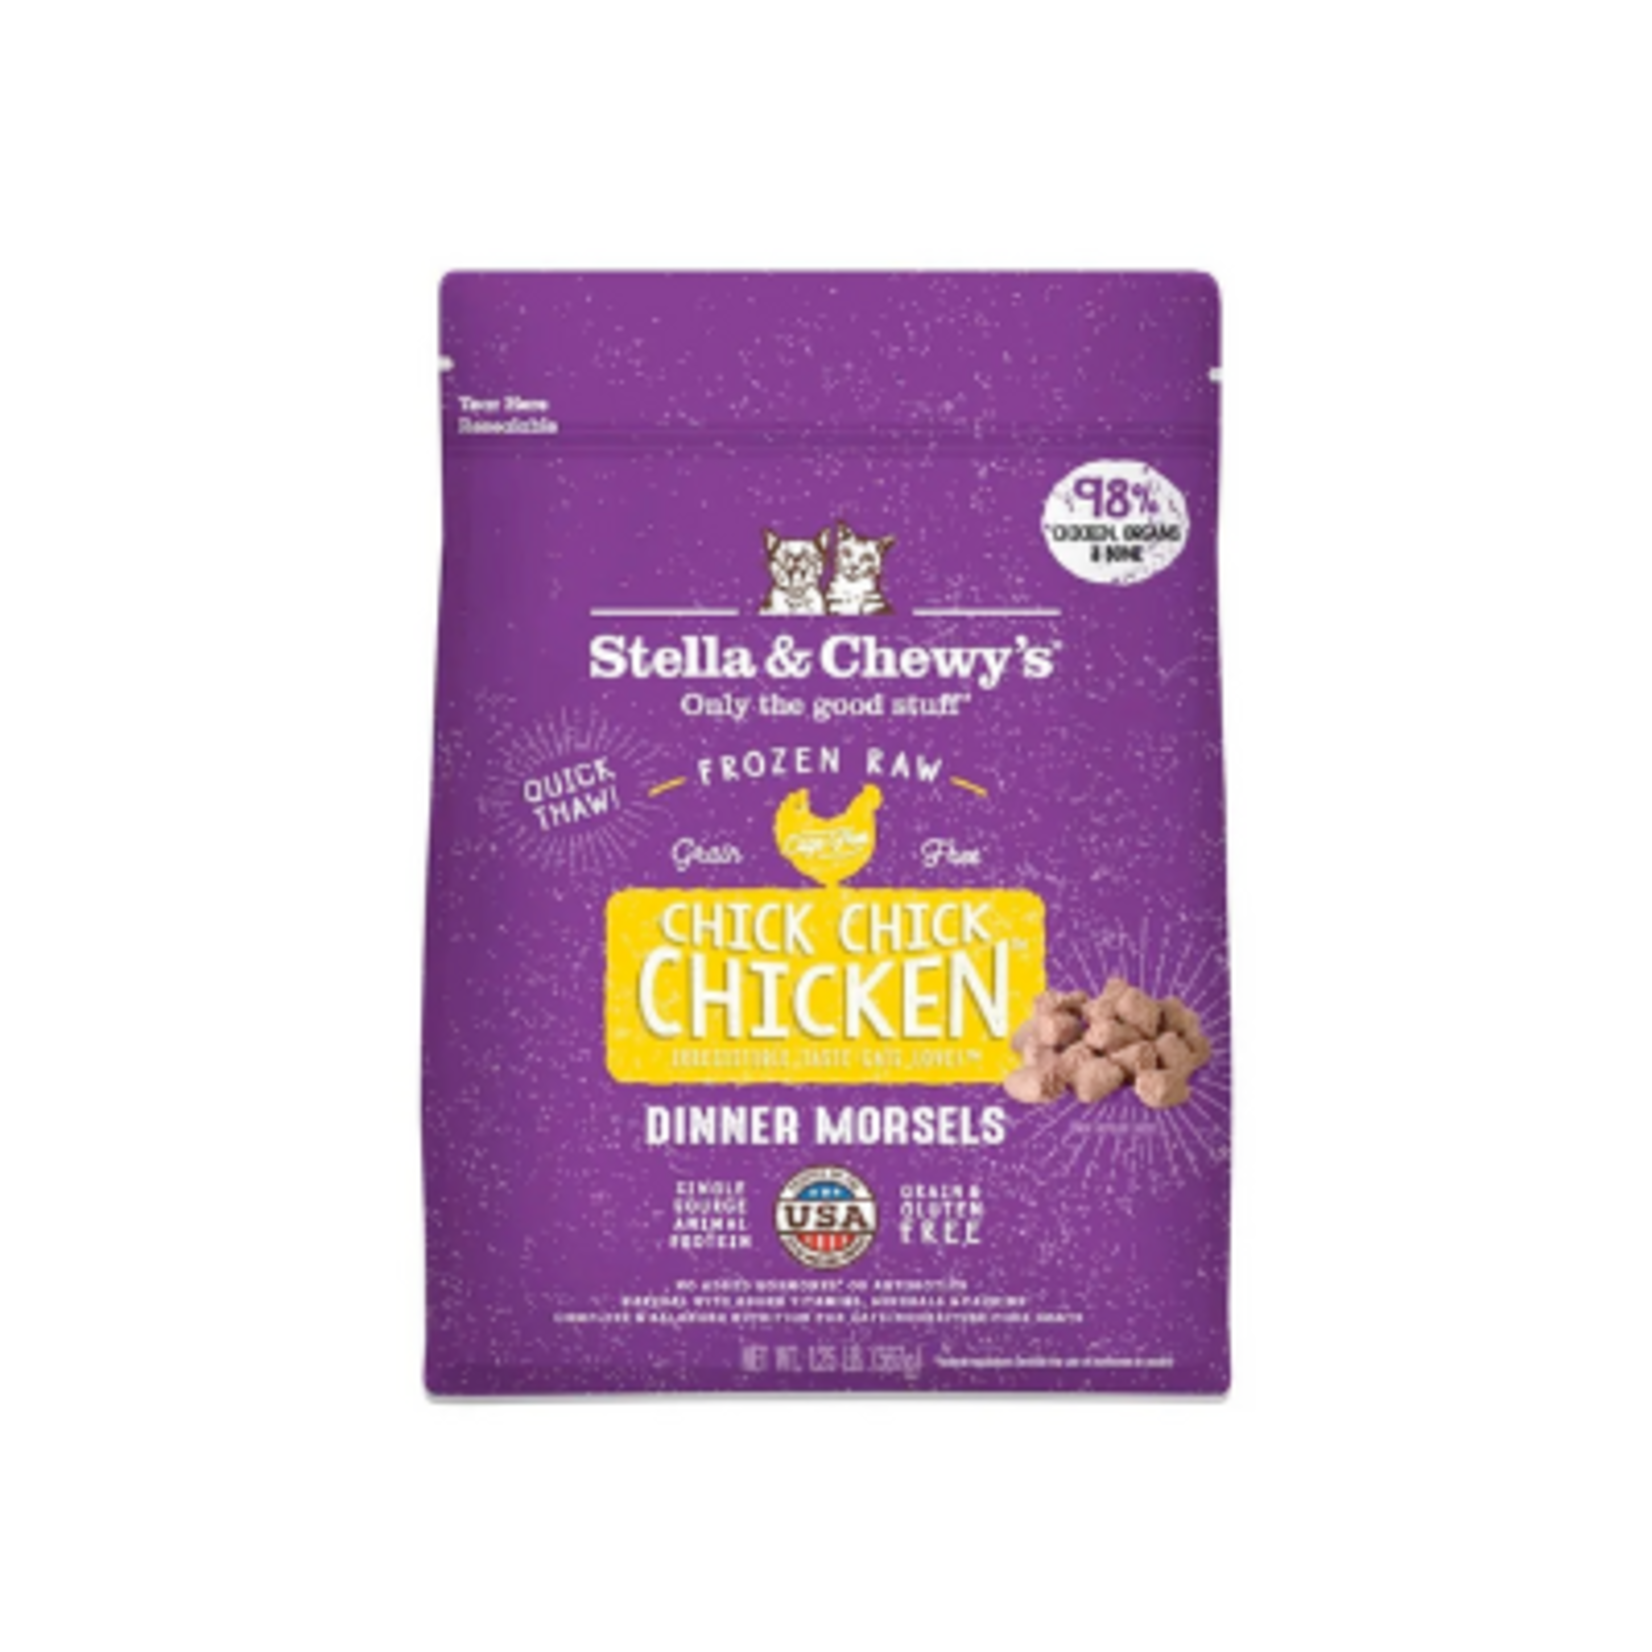 Stella & Chewy's 3# - Chick, Chick, Chicken - Raw Frozen Dinner Morsels - Stella & Chewy's - cat